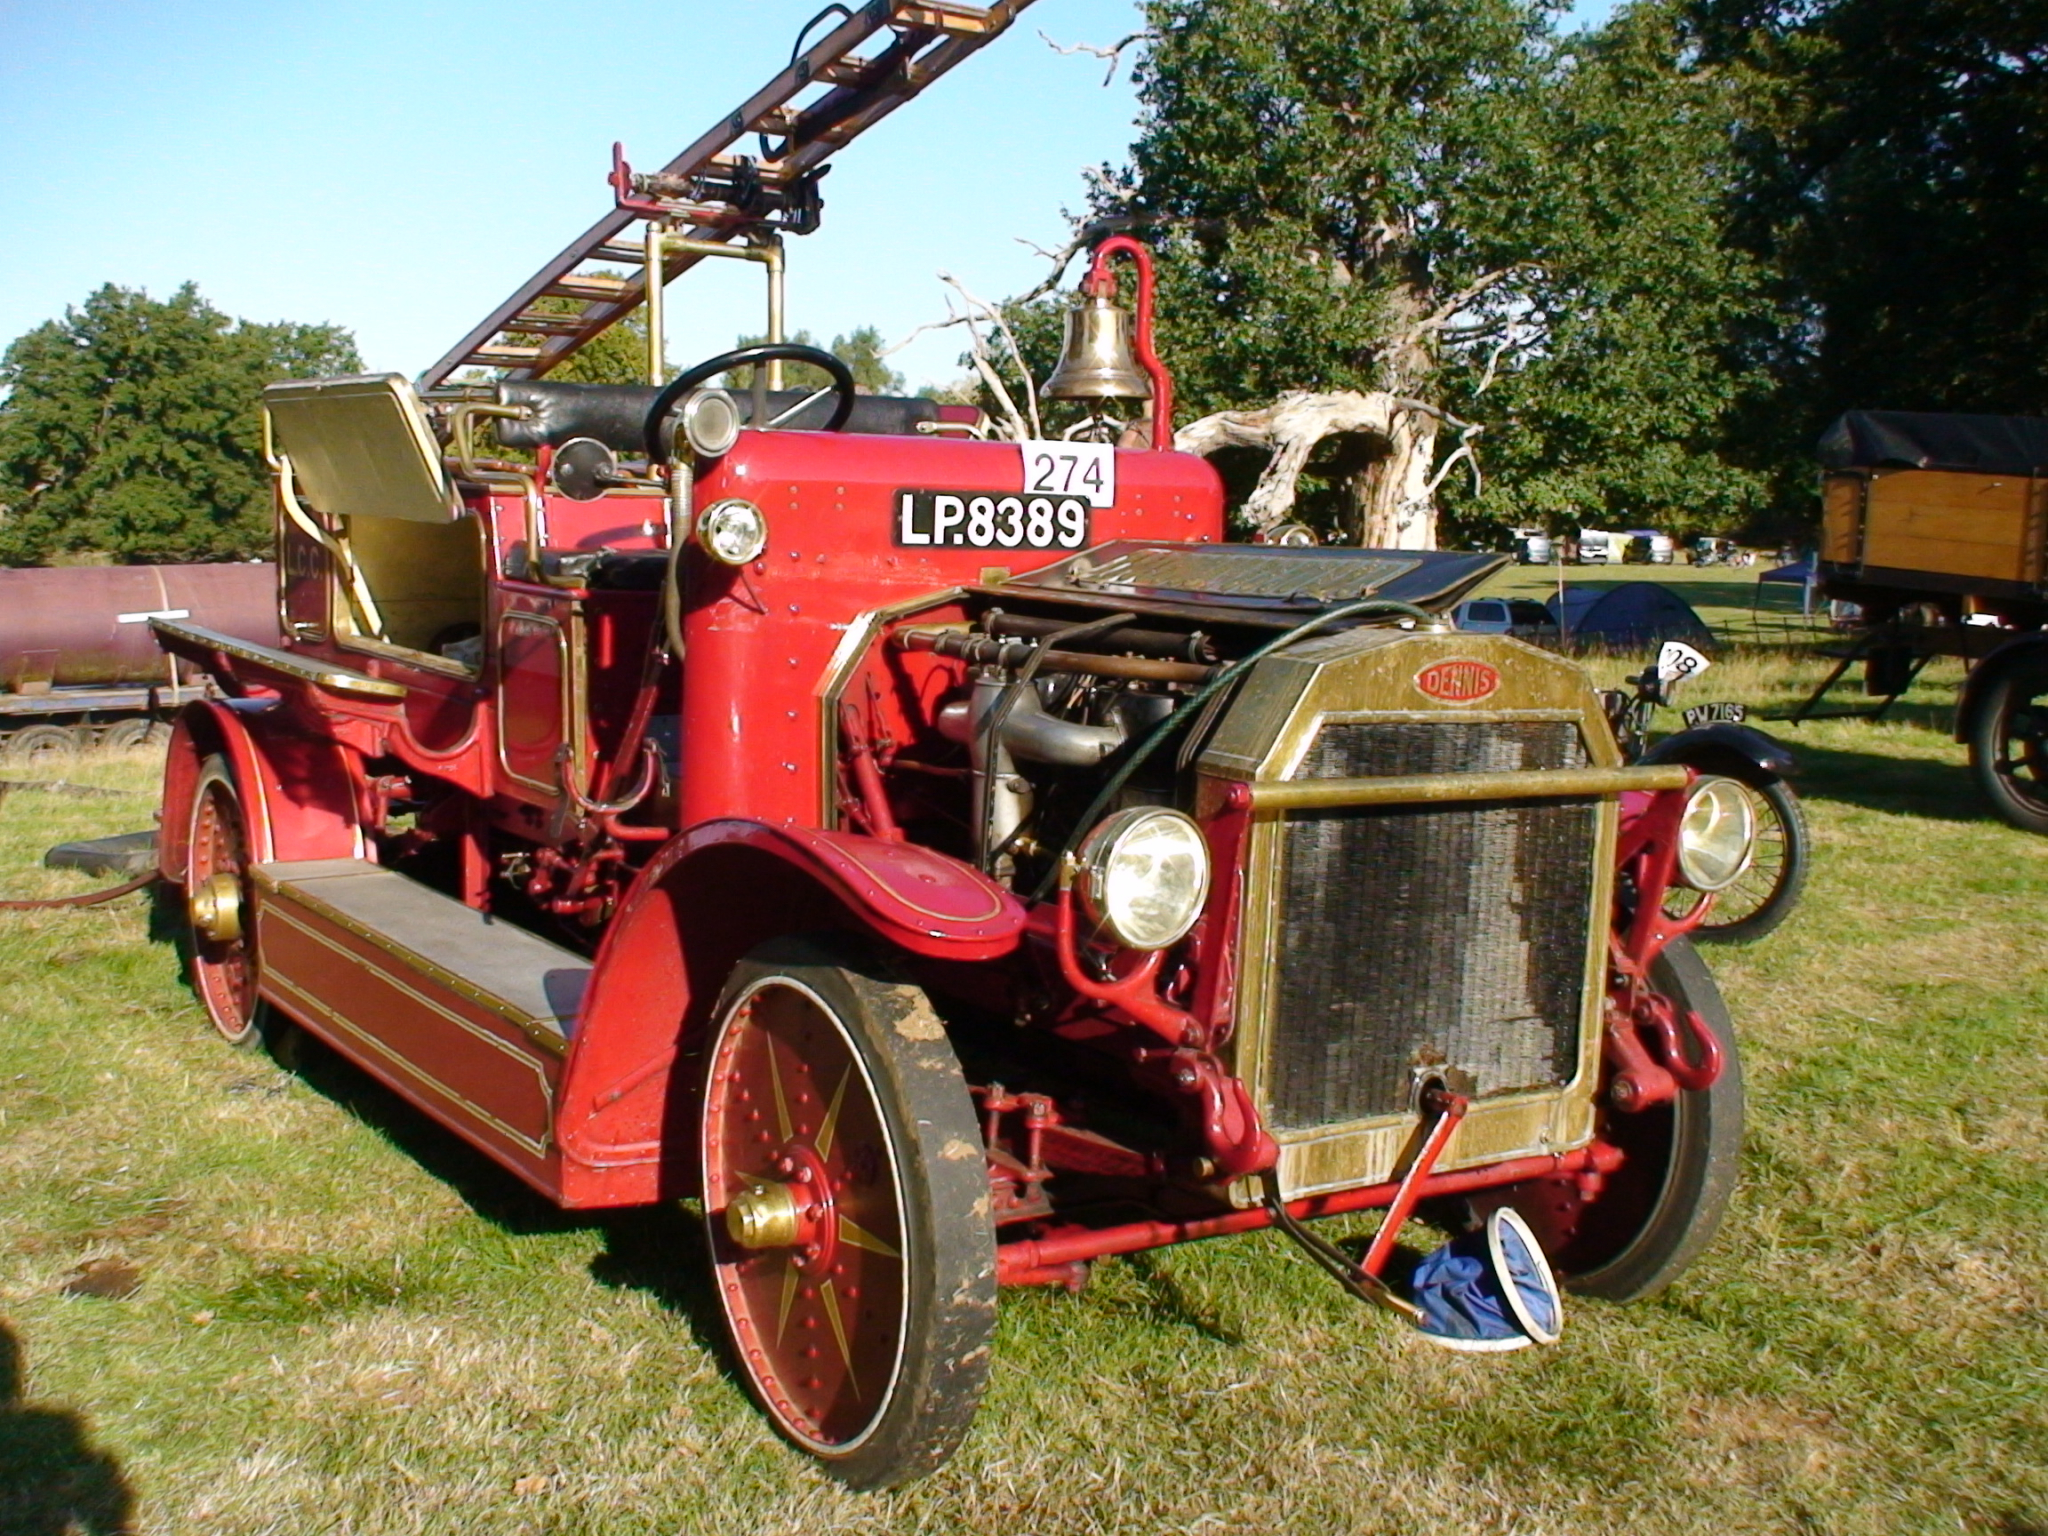 Not a mower; but a Dennis Bros. of Guildford 1916 Fire Engine - After the Lawnmowers, the best Exhibit at the Show - QUALITY!